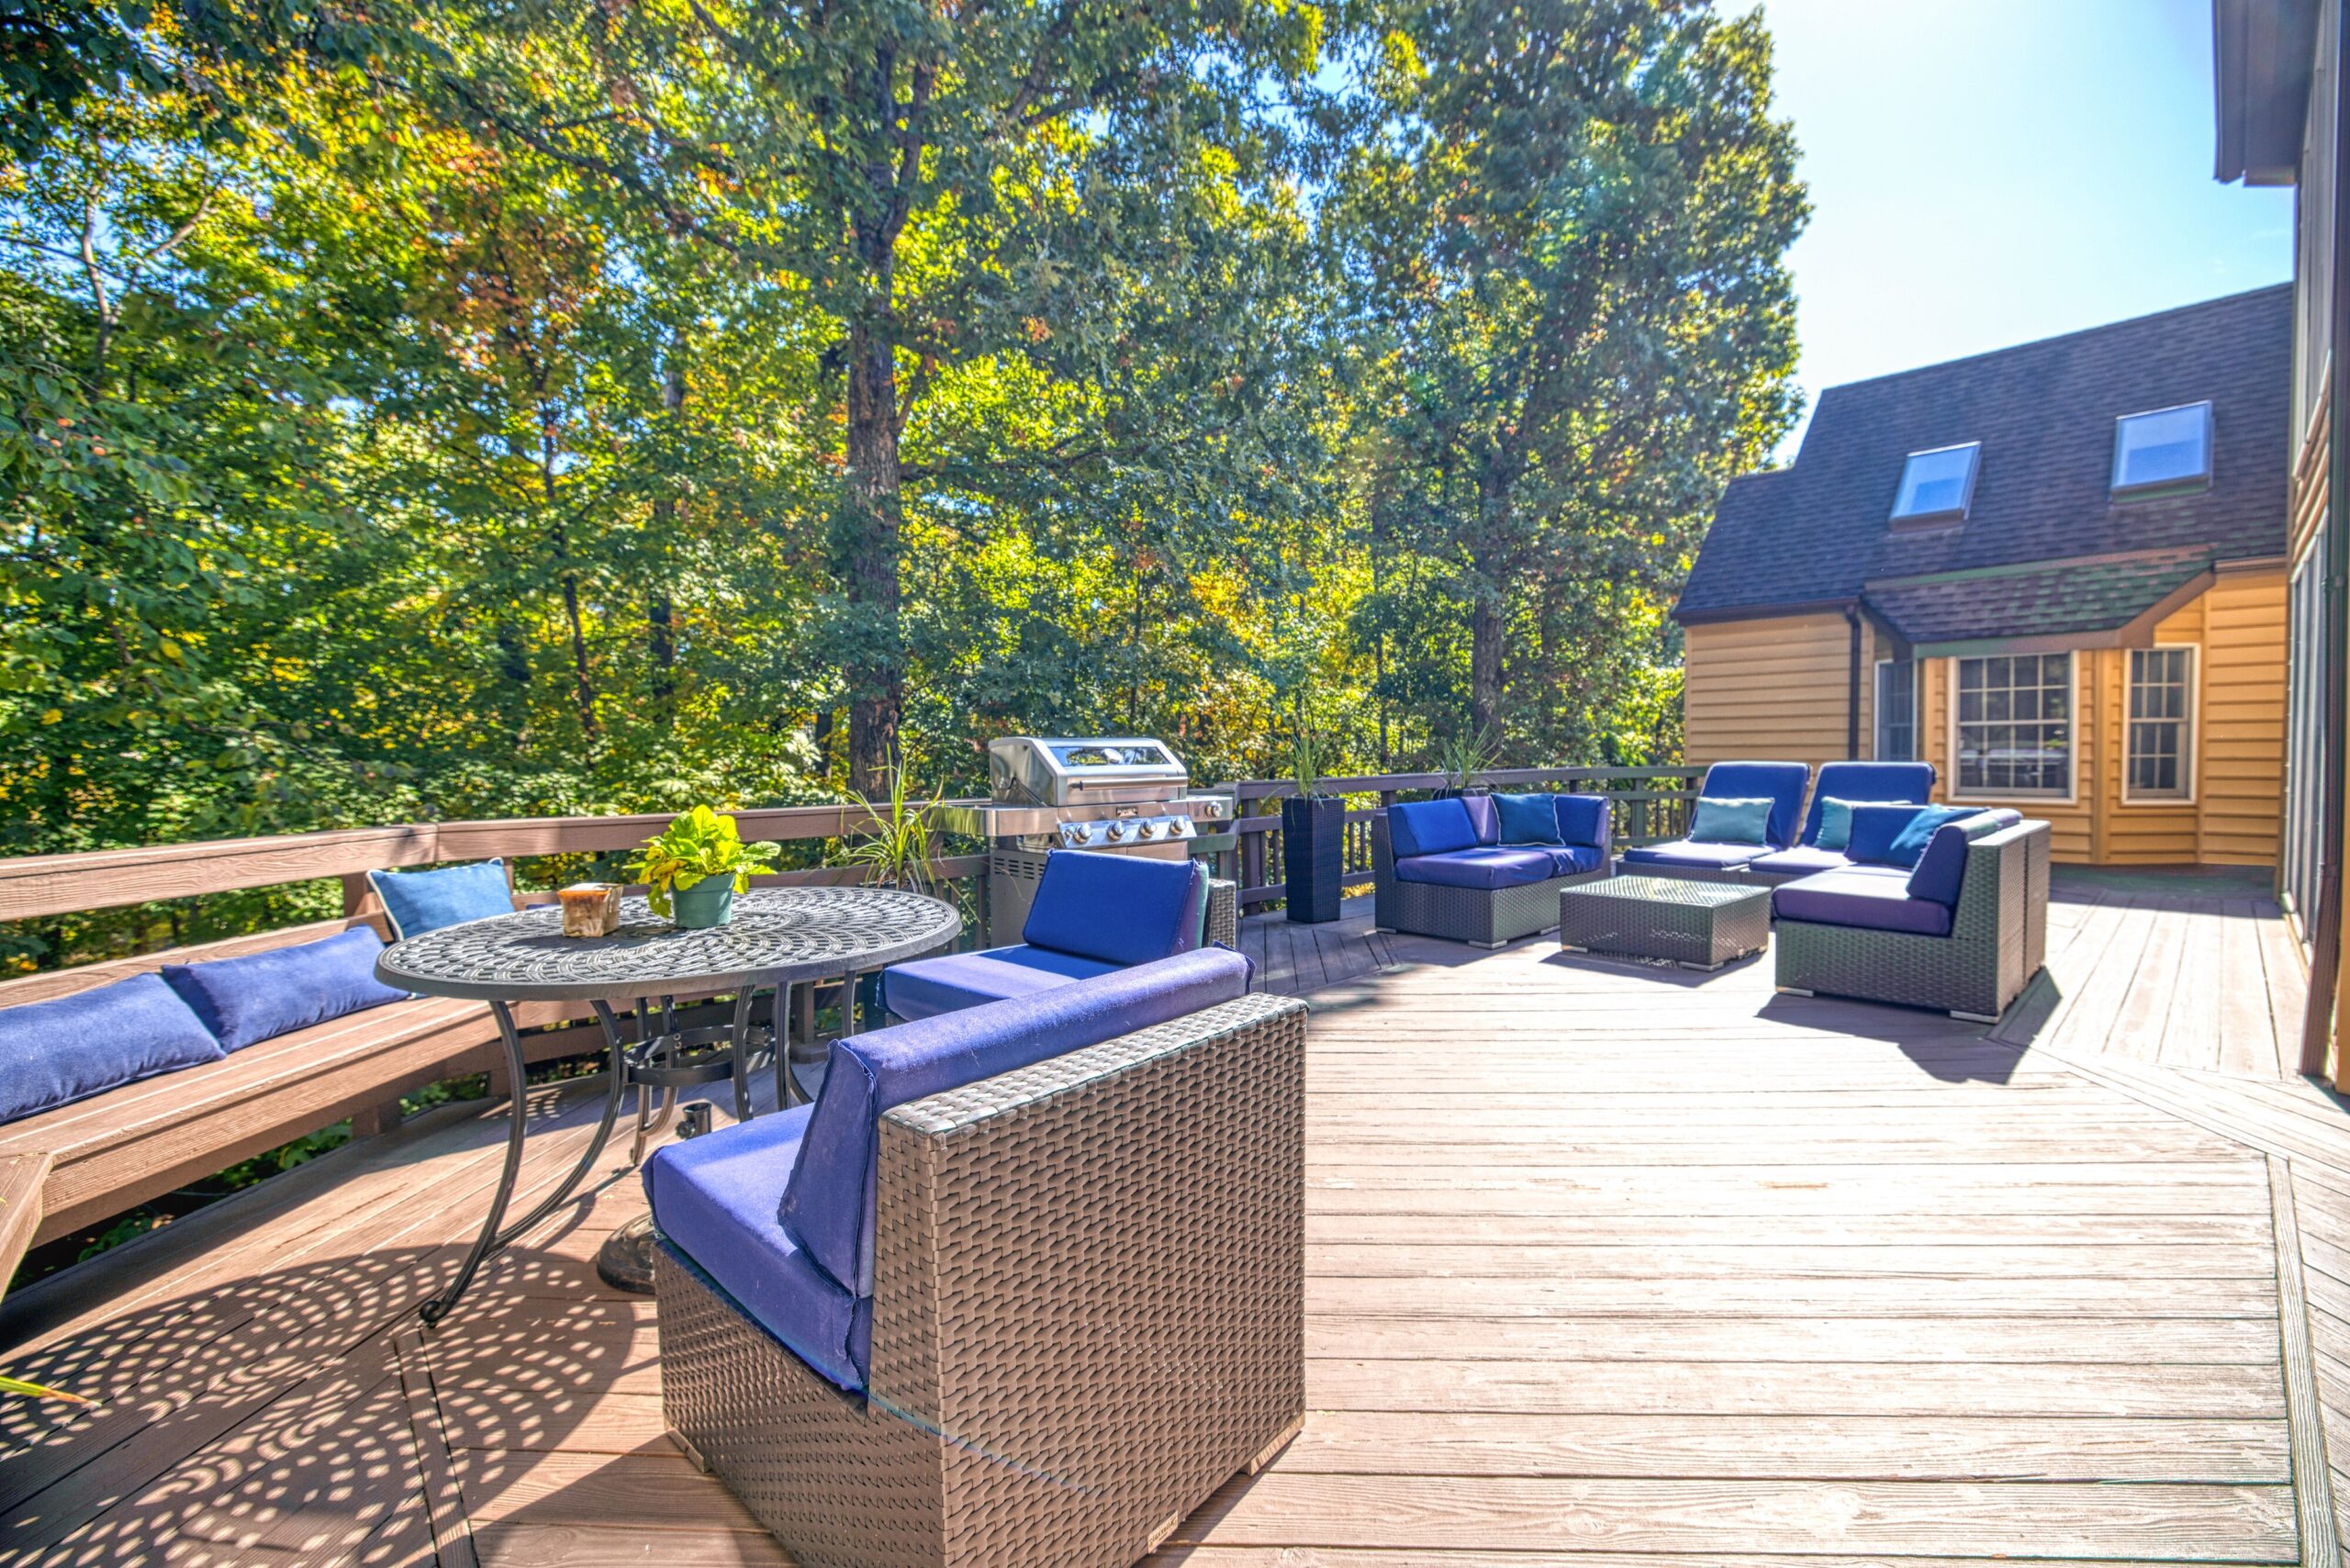 exterior photo of 21024 Starflower Way in Ashburn, VA - showing the rear deck from one end with various deck furniture